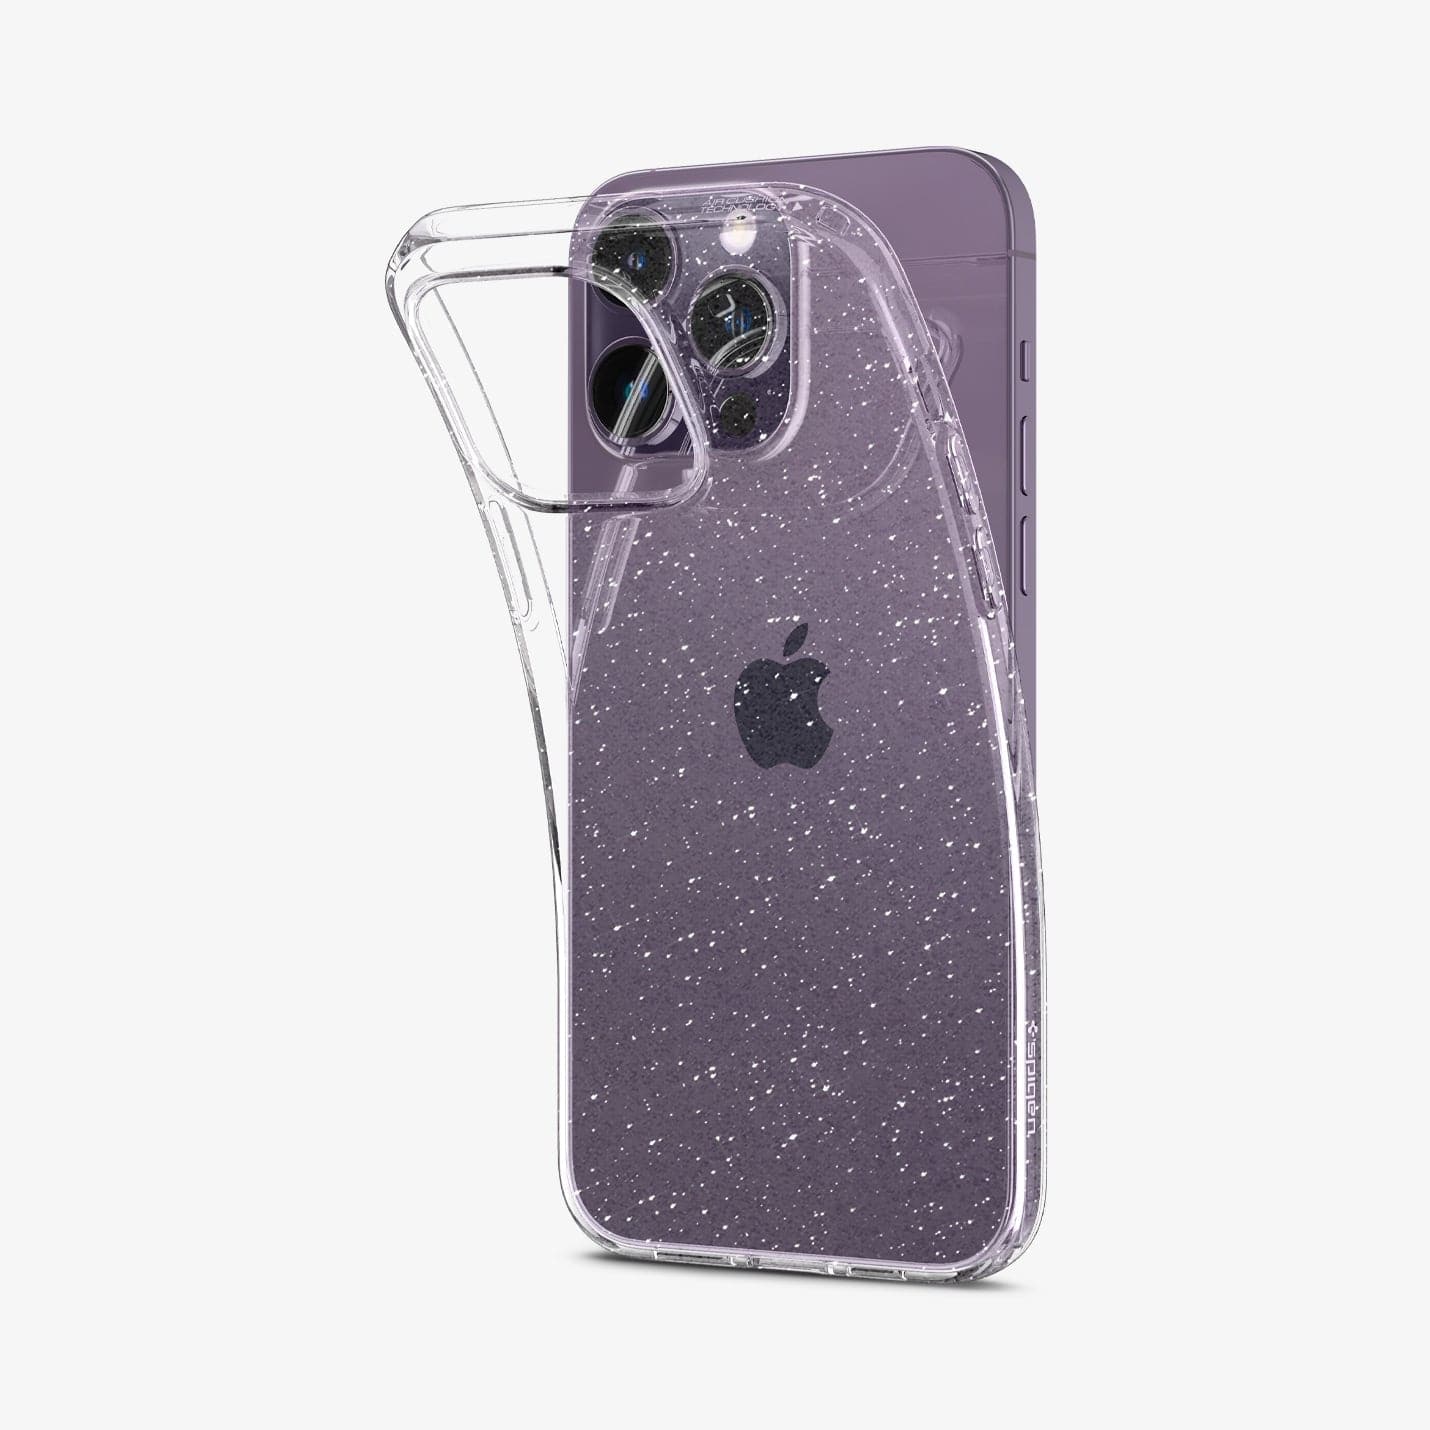 ACS04810 - iPhone 14 Pro Max Case Liquid Crystal Glitter in crystal quartz showing the back bending slightly away from the device to show the flexibility